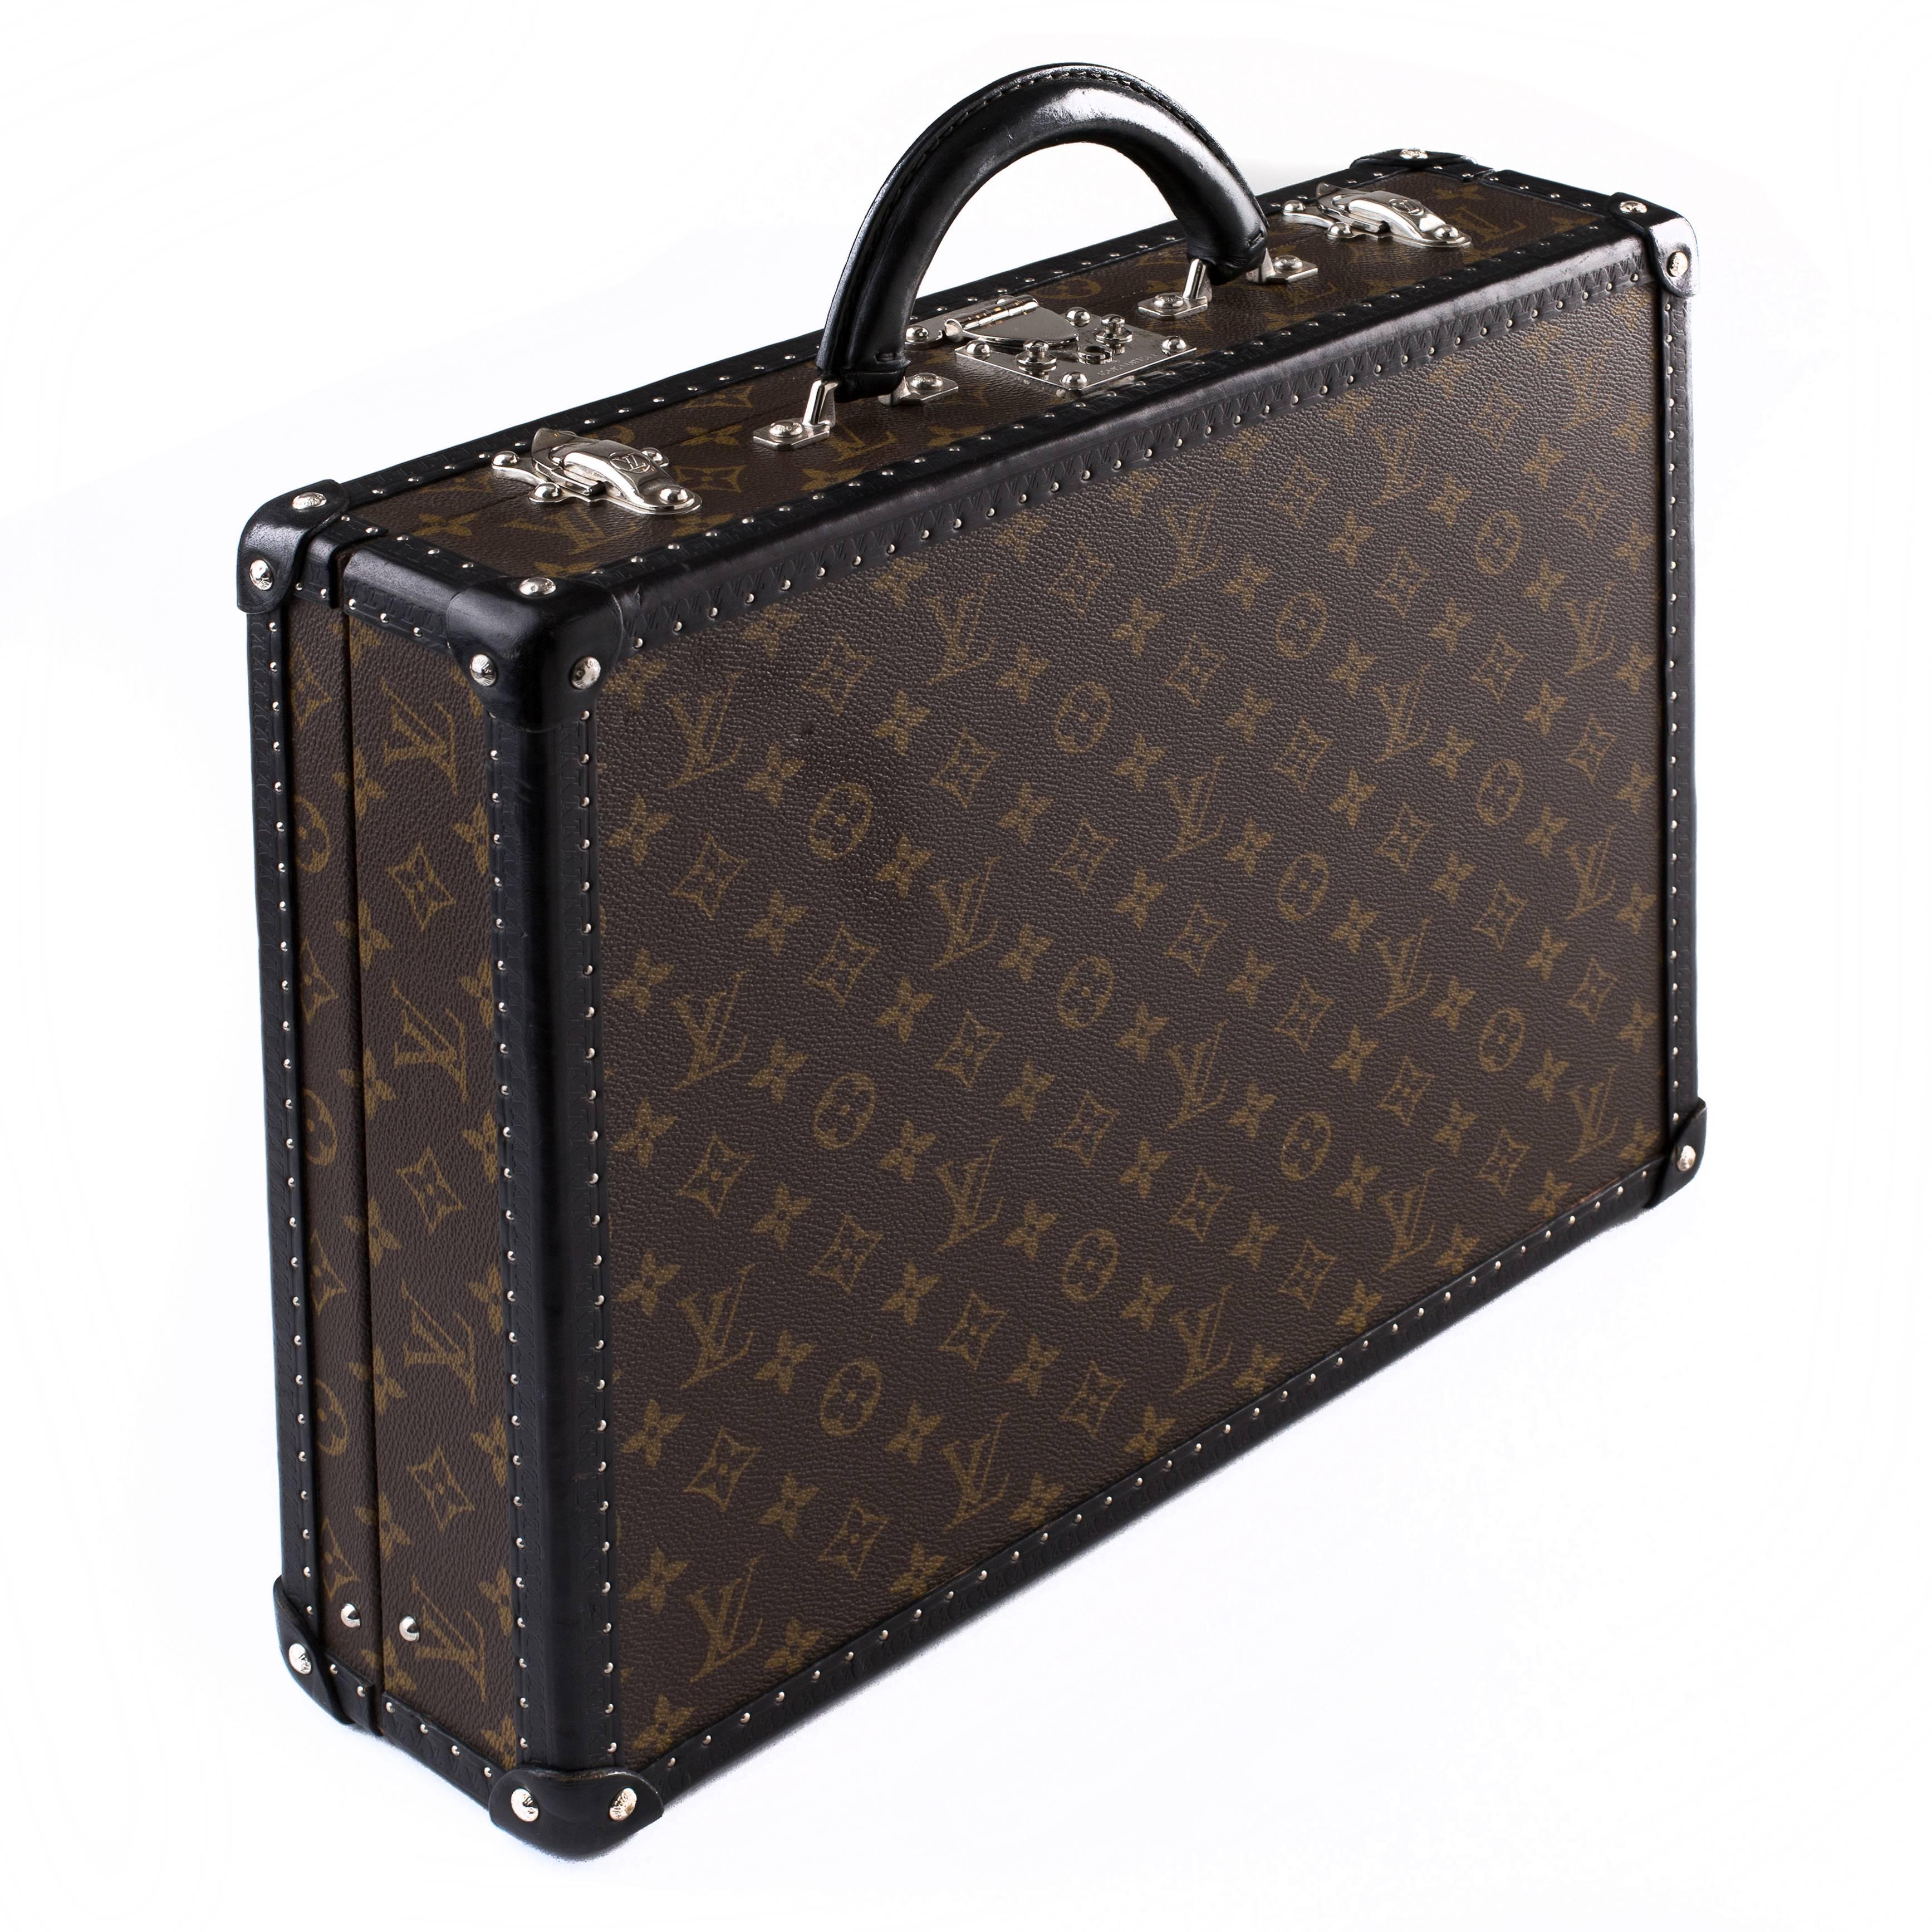 French Louis Vuitton Monogram Briefcase with Black Edging